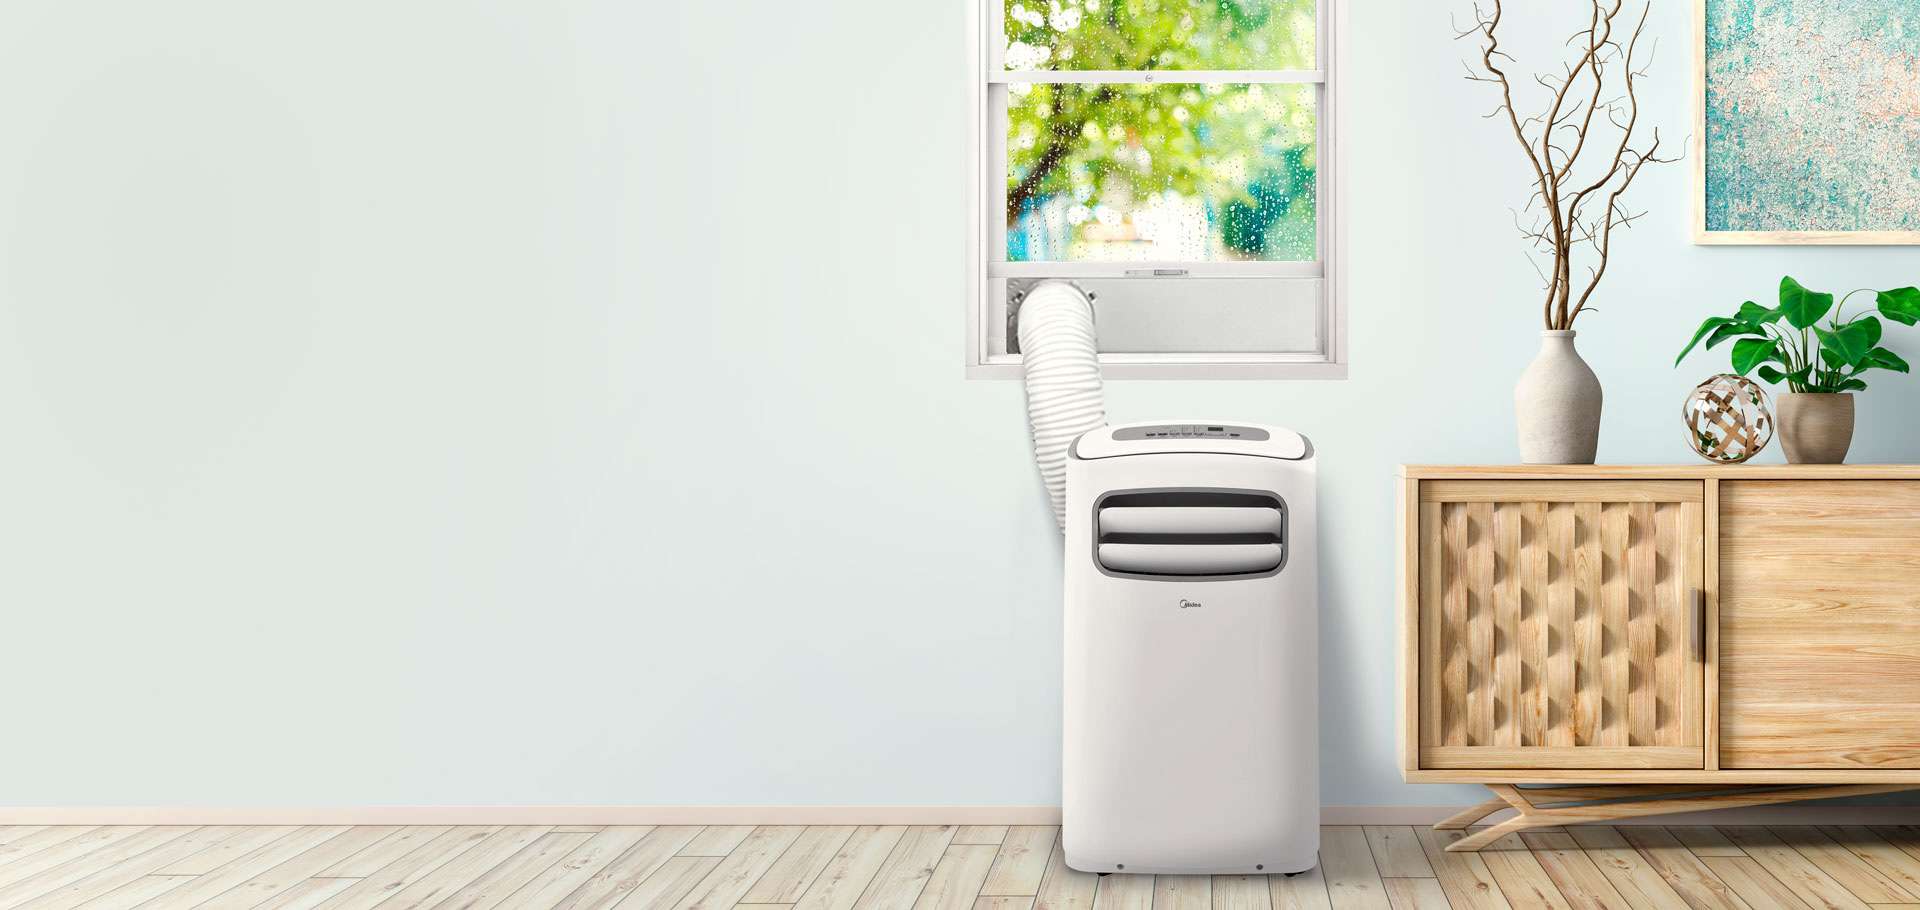 How To Install A Portable Air Conditioner